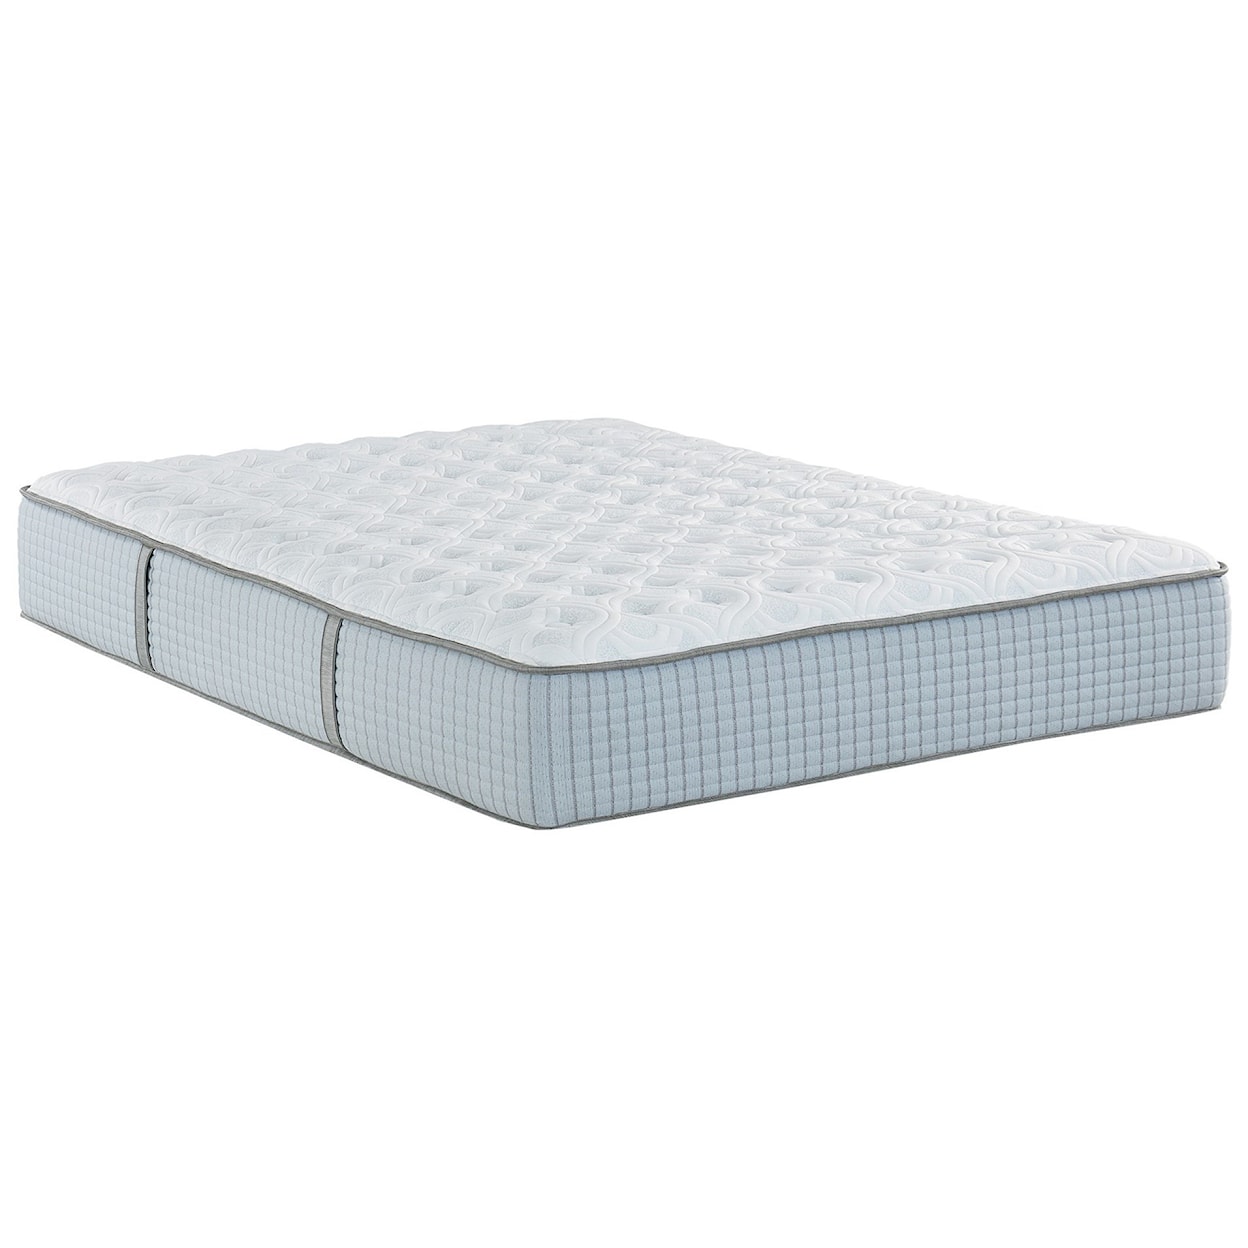 Restonic Clarion IV Luxury Plush and Luxury Firm King 2-Sided Firm / Plush Mattress